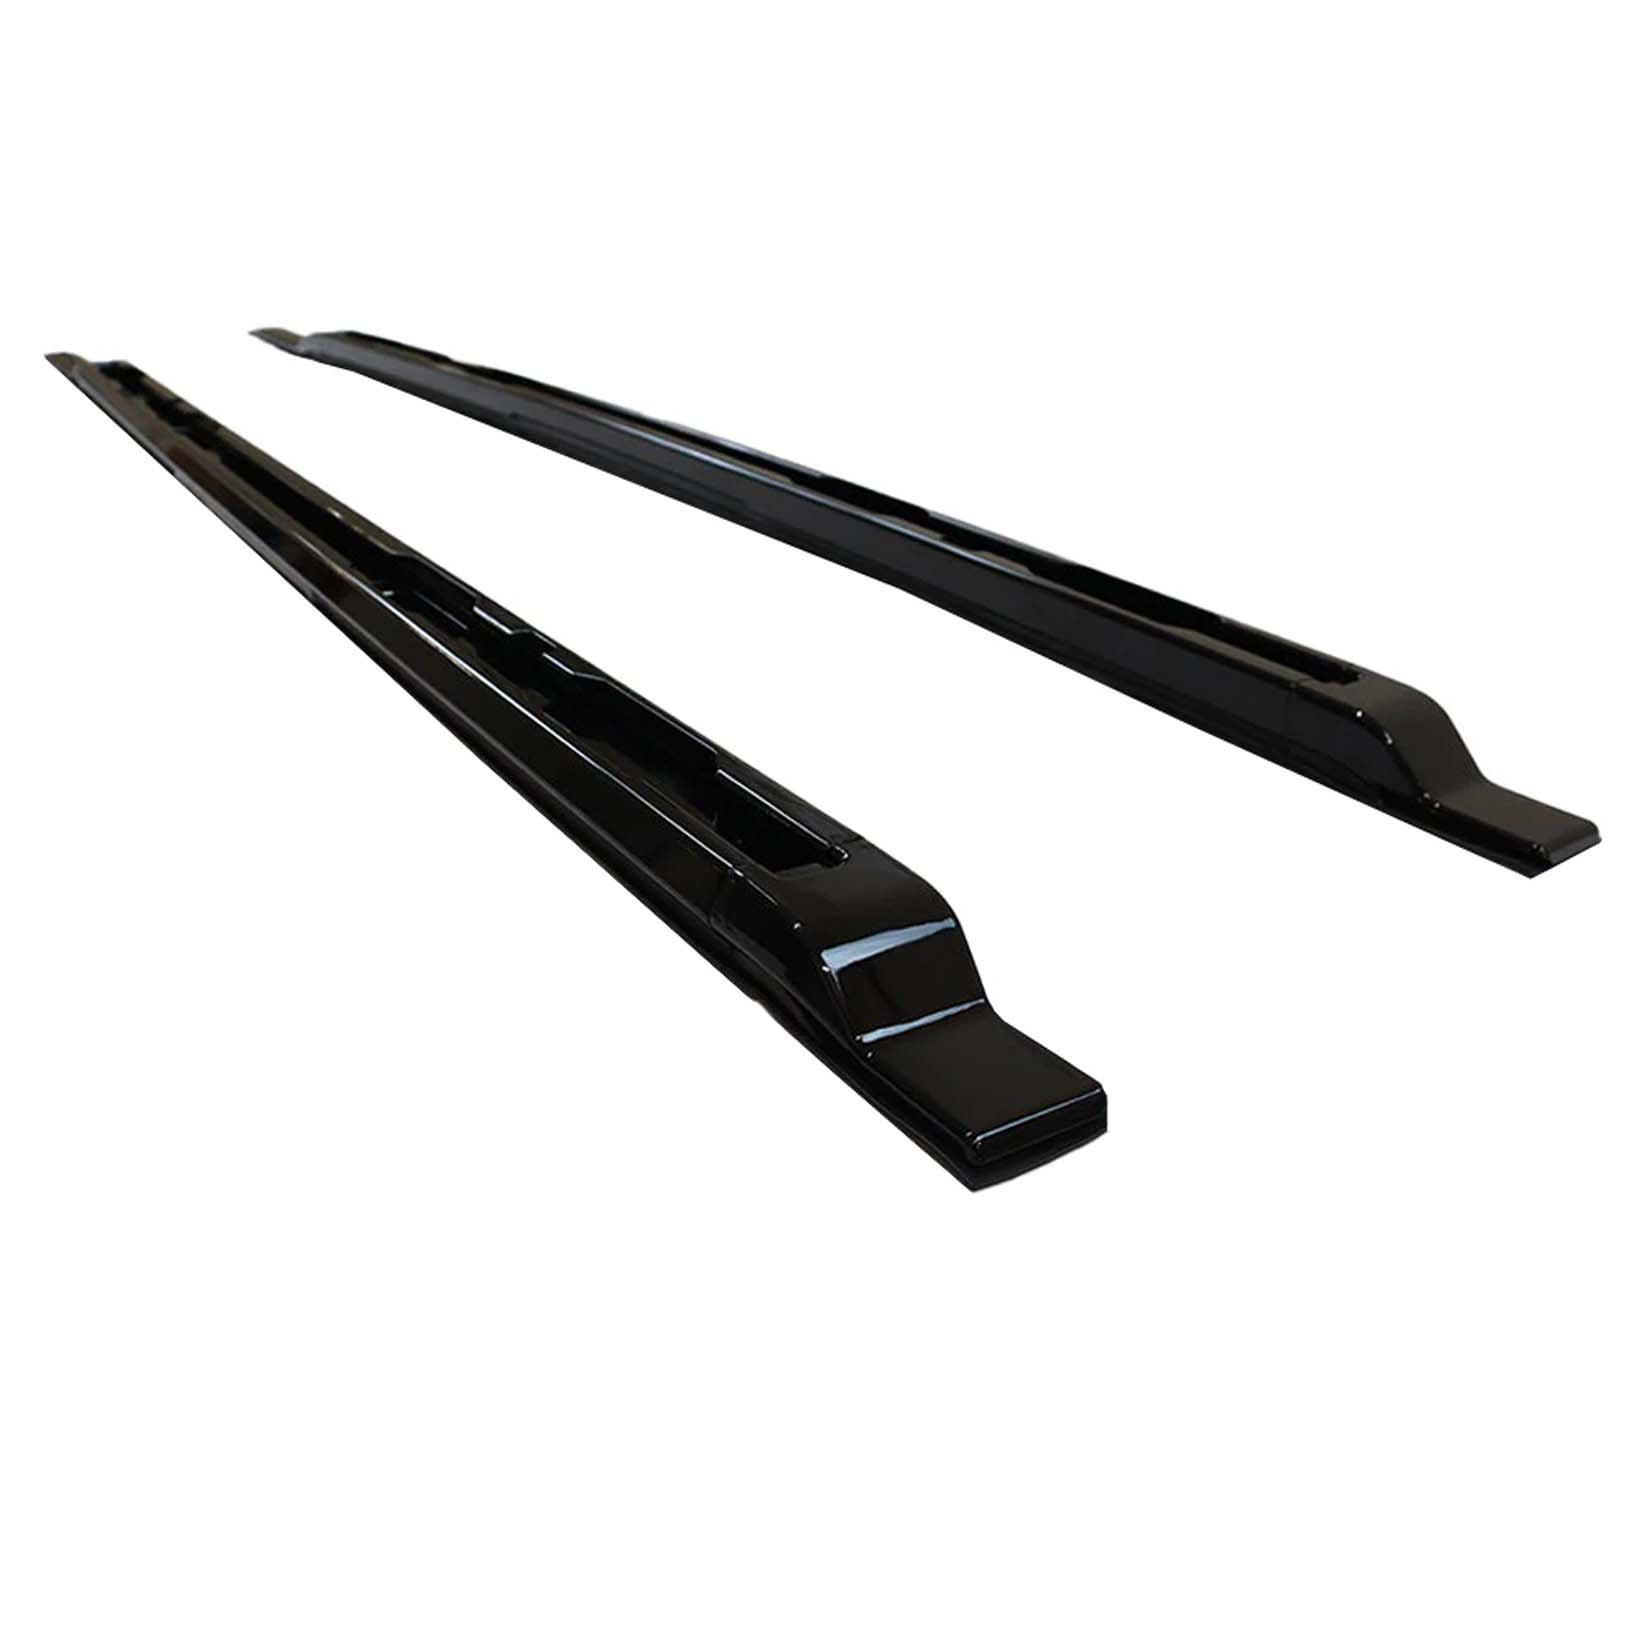 LAND ROVER DEFENDER 90 L663 2020 ON OE STYLE ROOF RAILS - PAIR - IN GLOSS BLACK - Storm Xccessories2